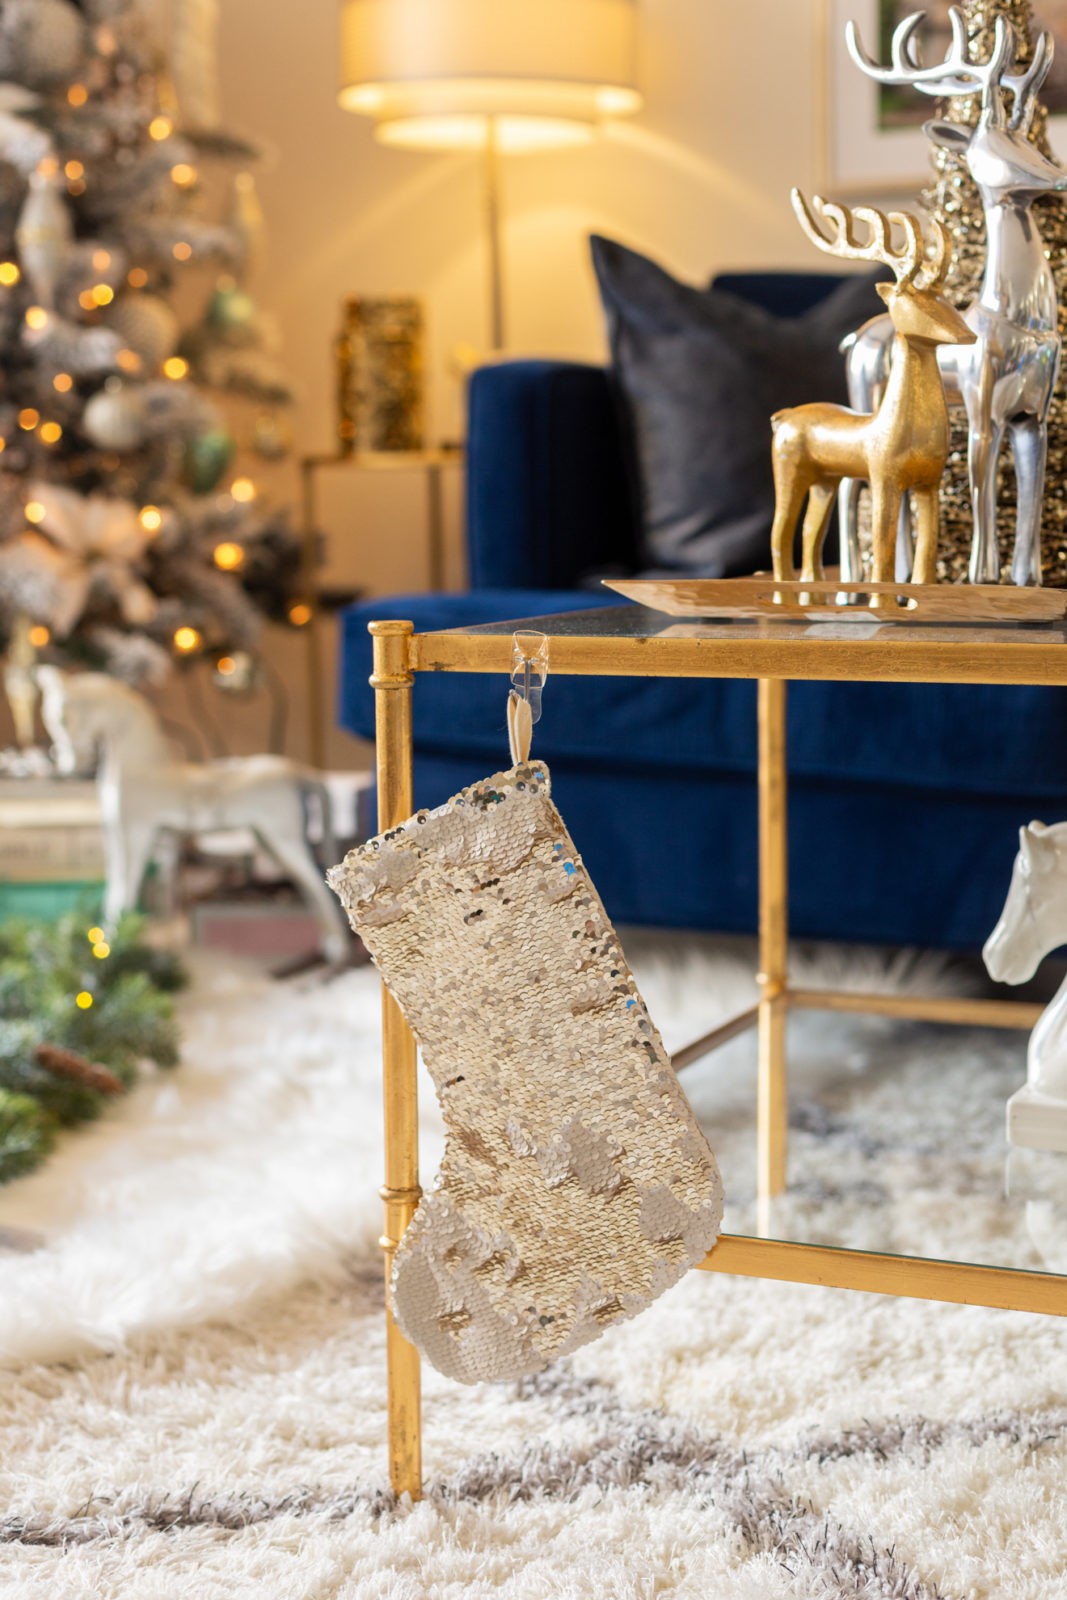 Holiday Home Decor by Home Decor Blogger Laura Lily | Holiday Home Decor 2019 by popular Los Angeles life and style blogger, Laura Lily: image of a sequin stockings from Target.